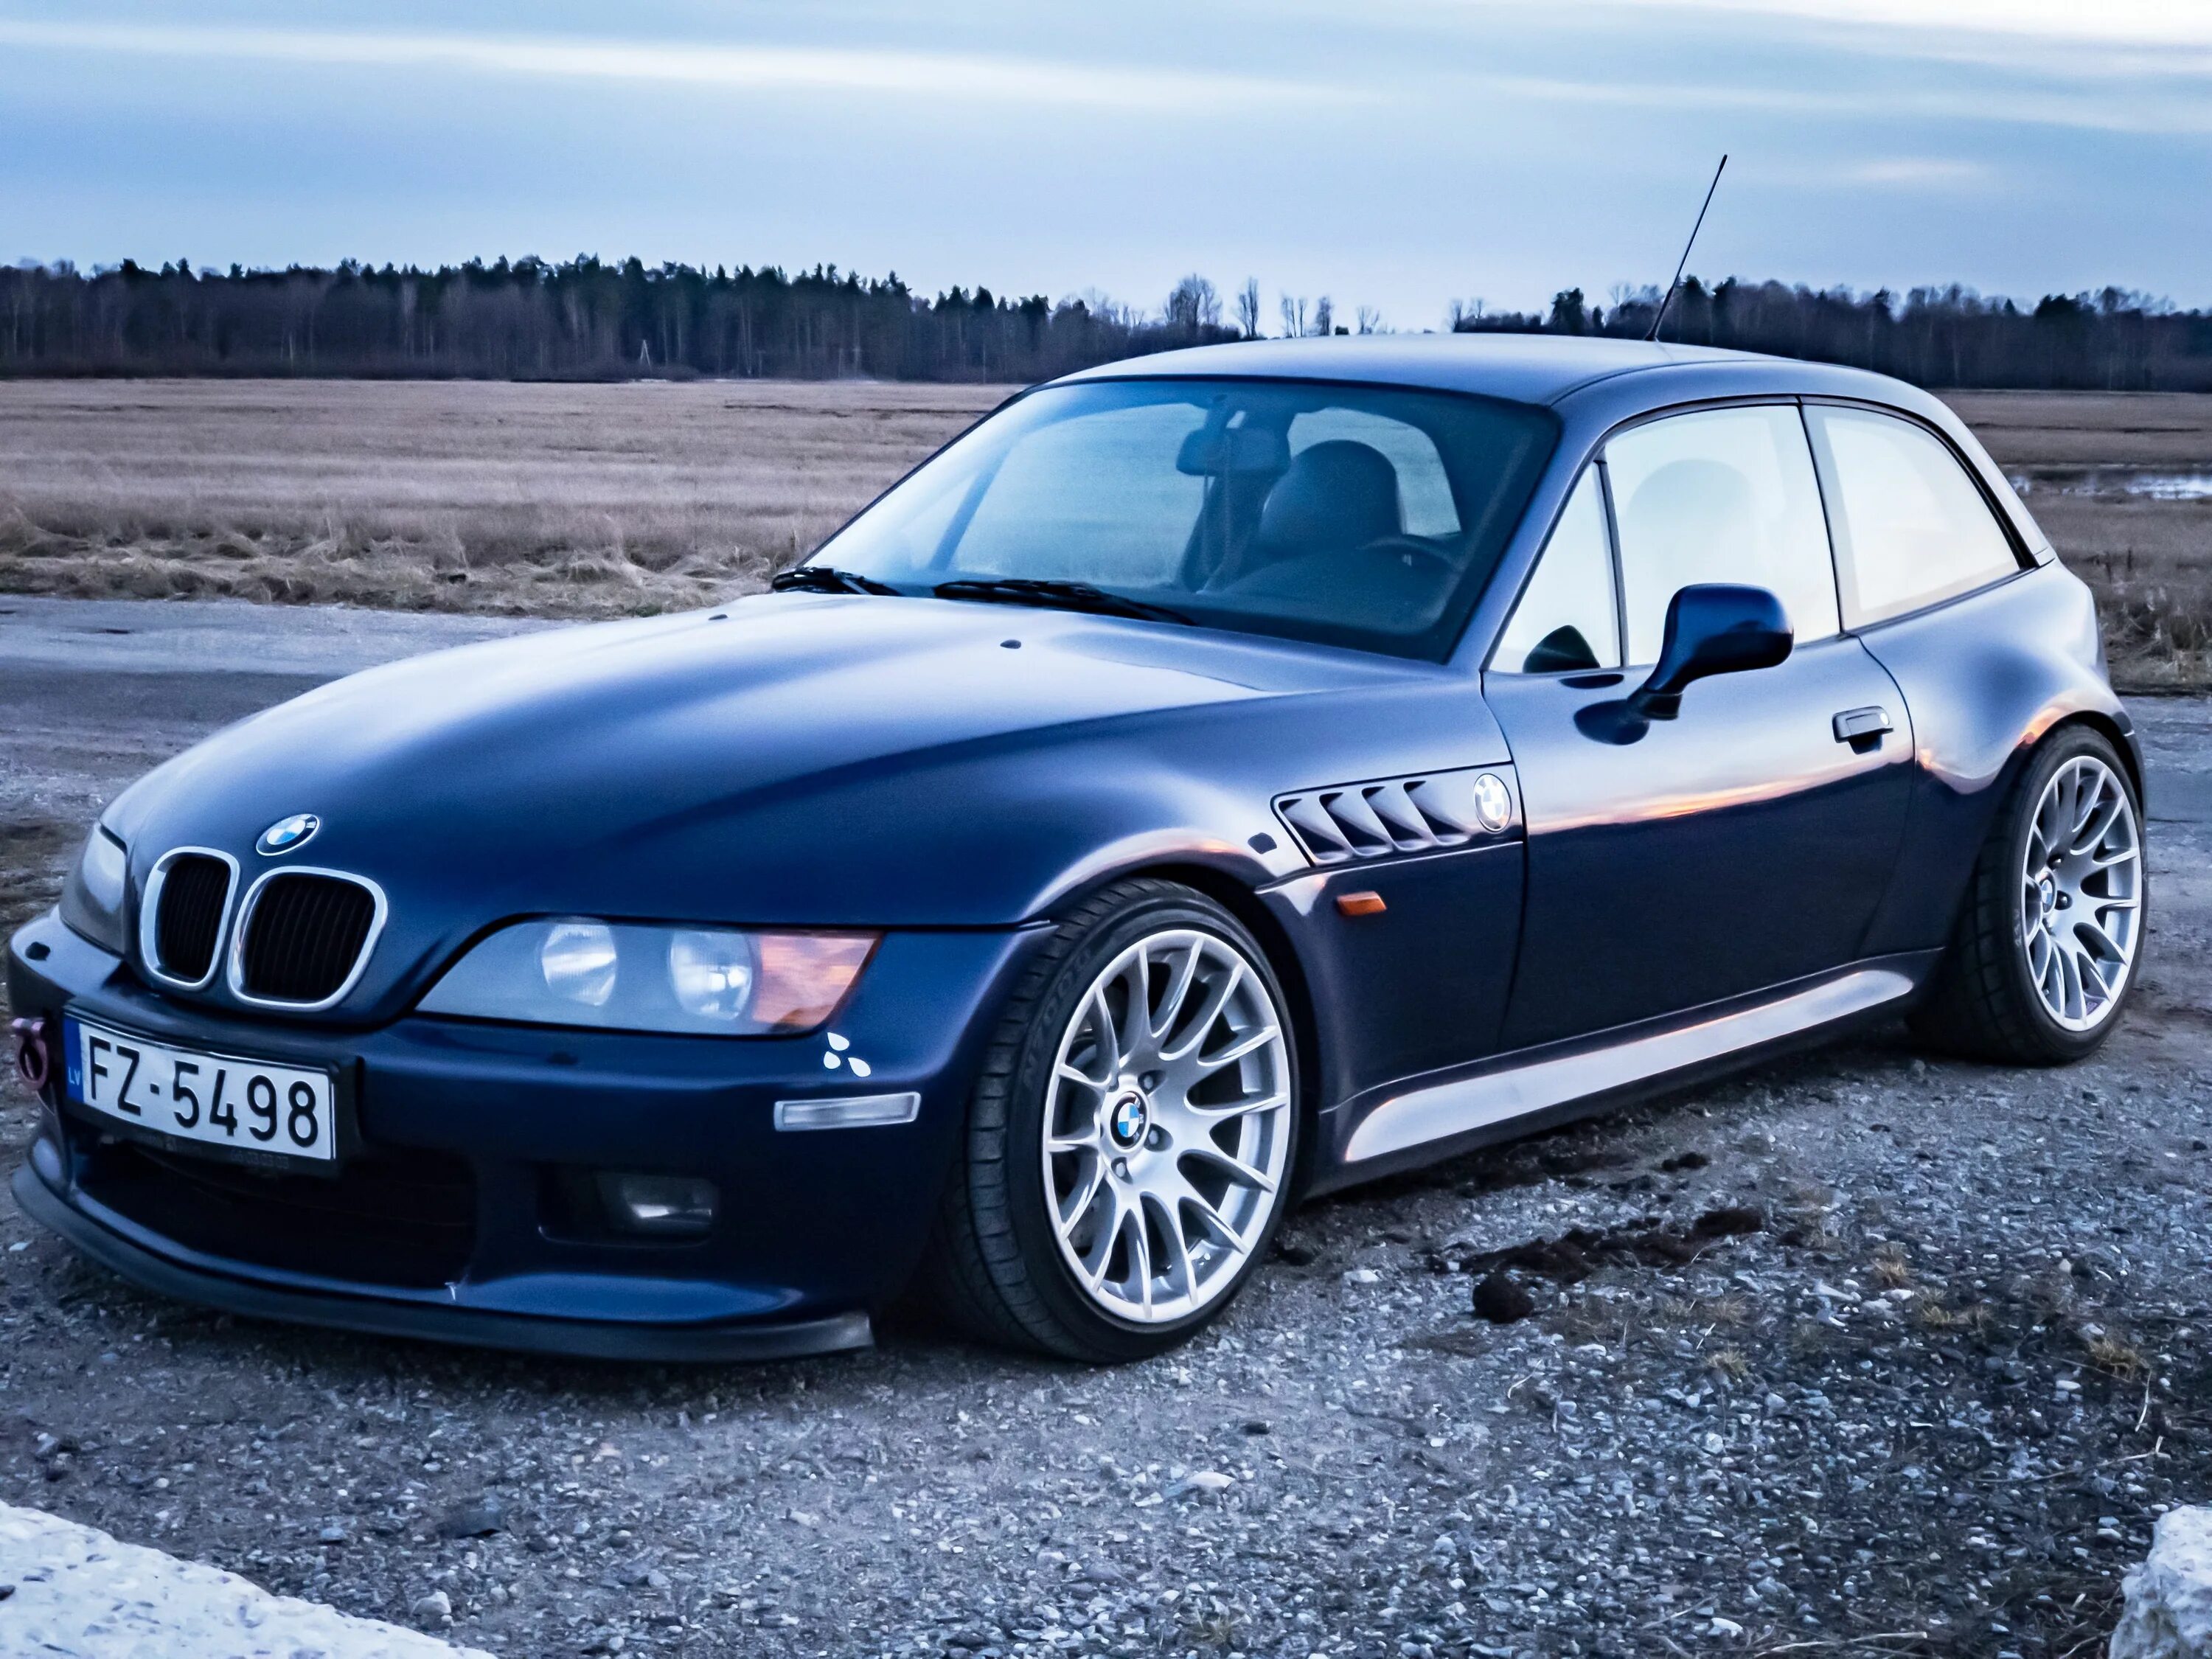 Bmw m coupe. BMW z3. BMW z3 купе. BMW z3 2008. BMW z3 m Coupe.